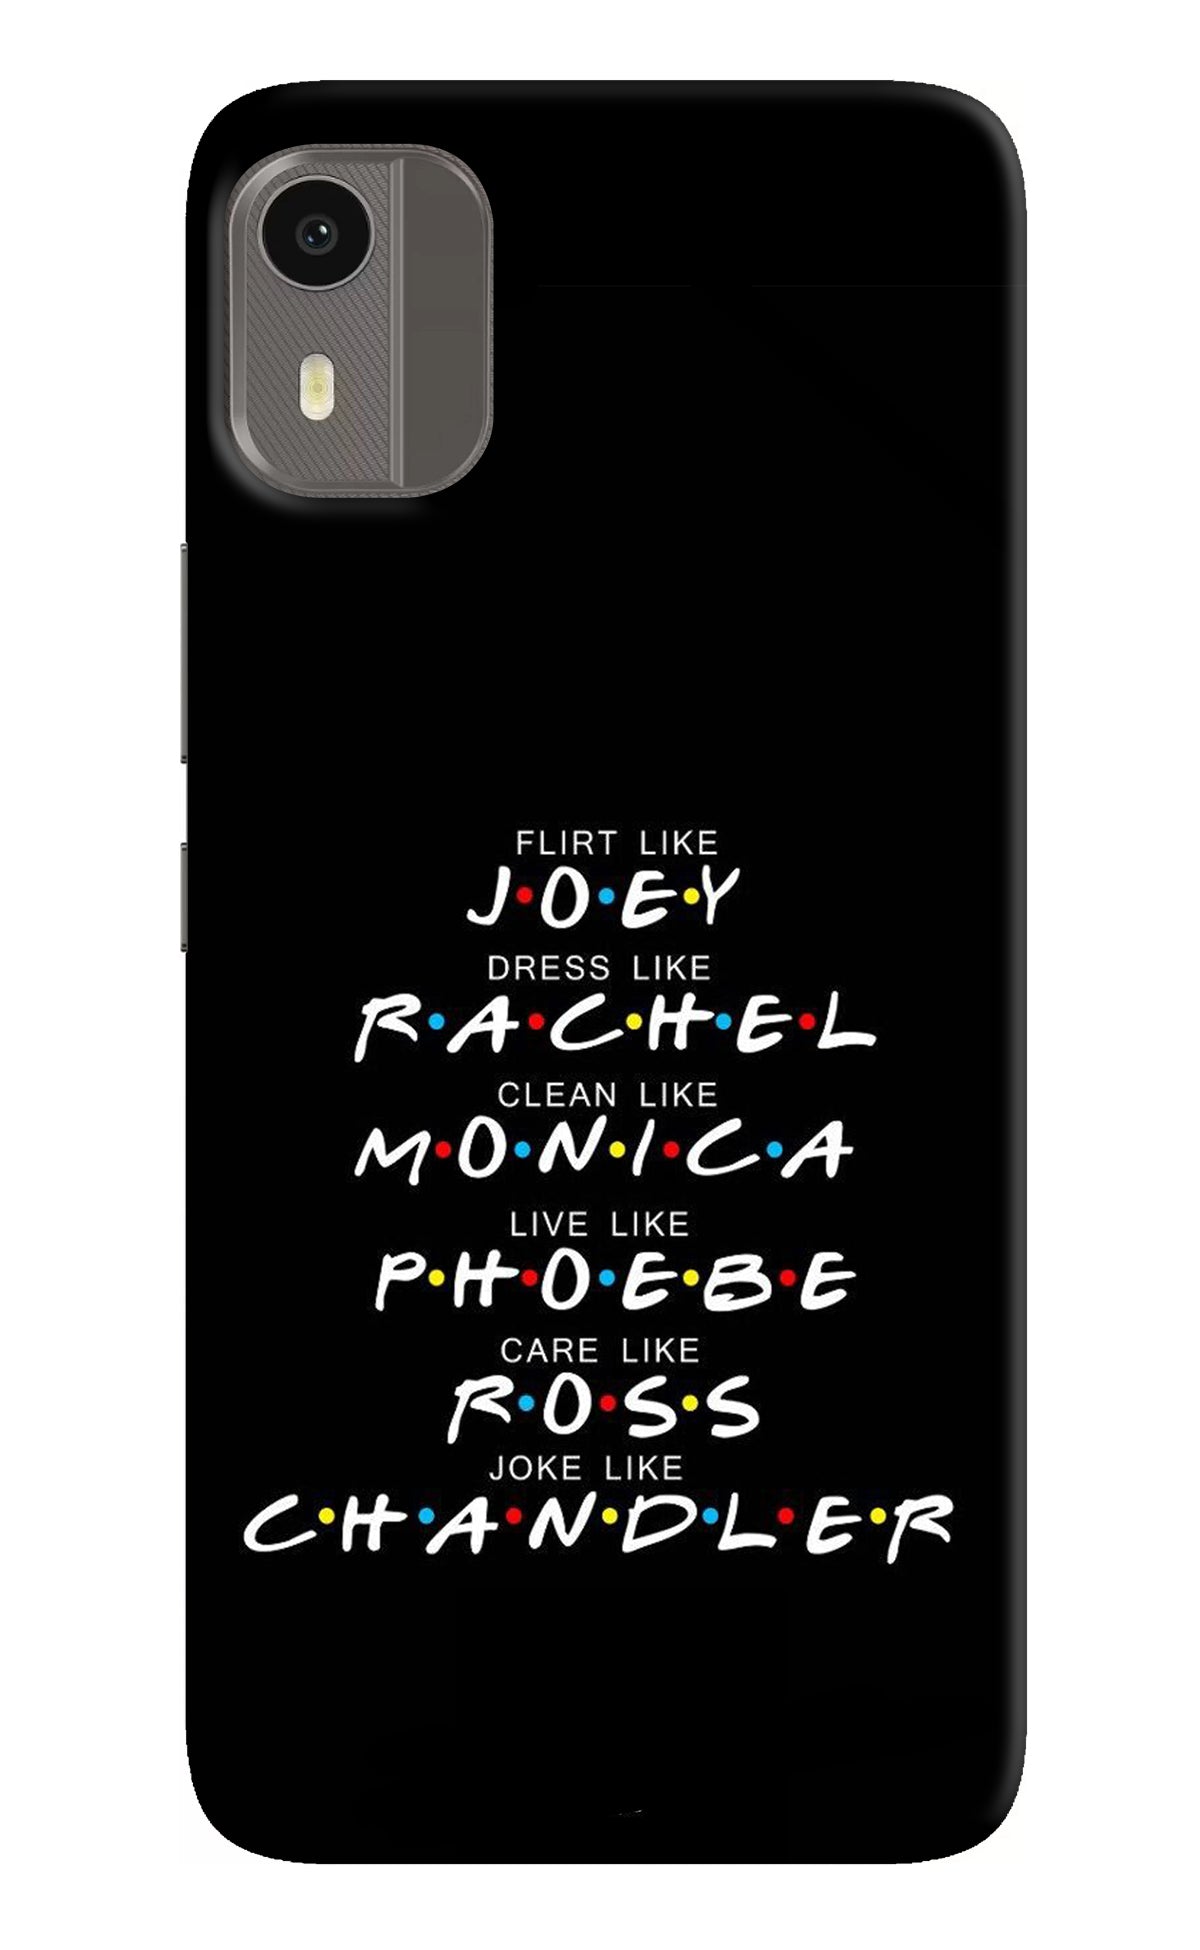 FRIENDS Character Nokia C12/C12 Pro Back Cover